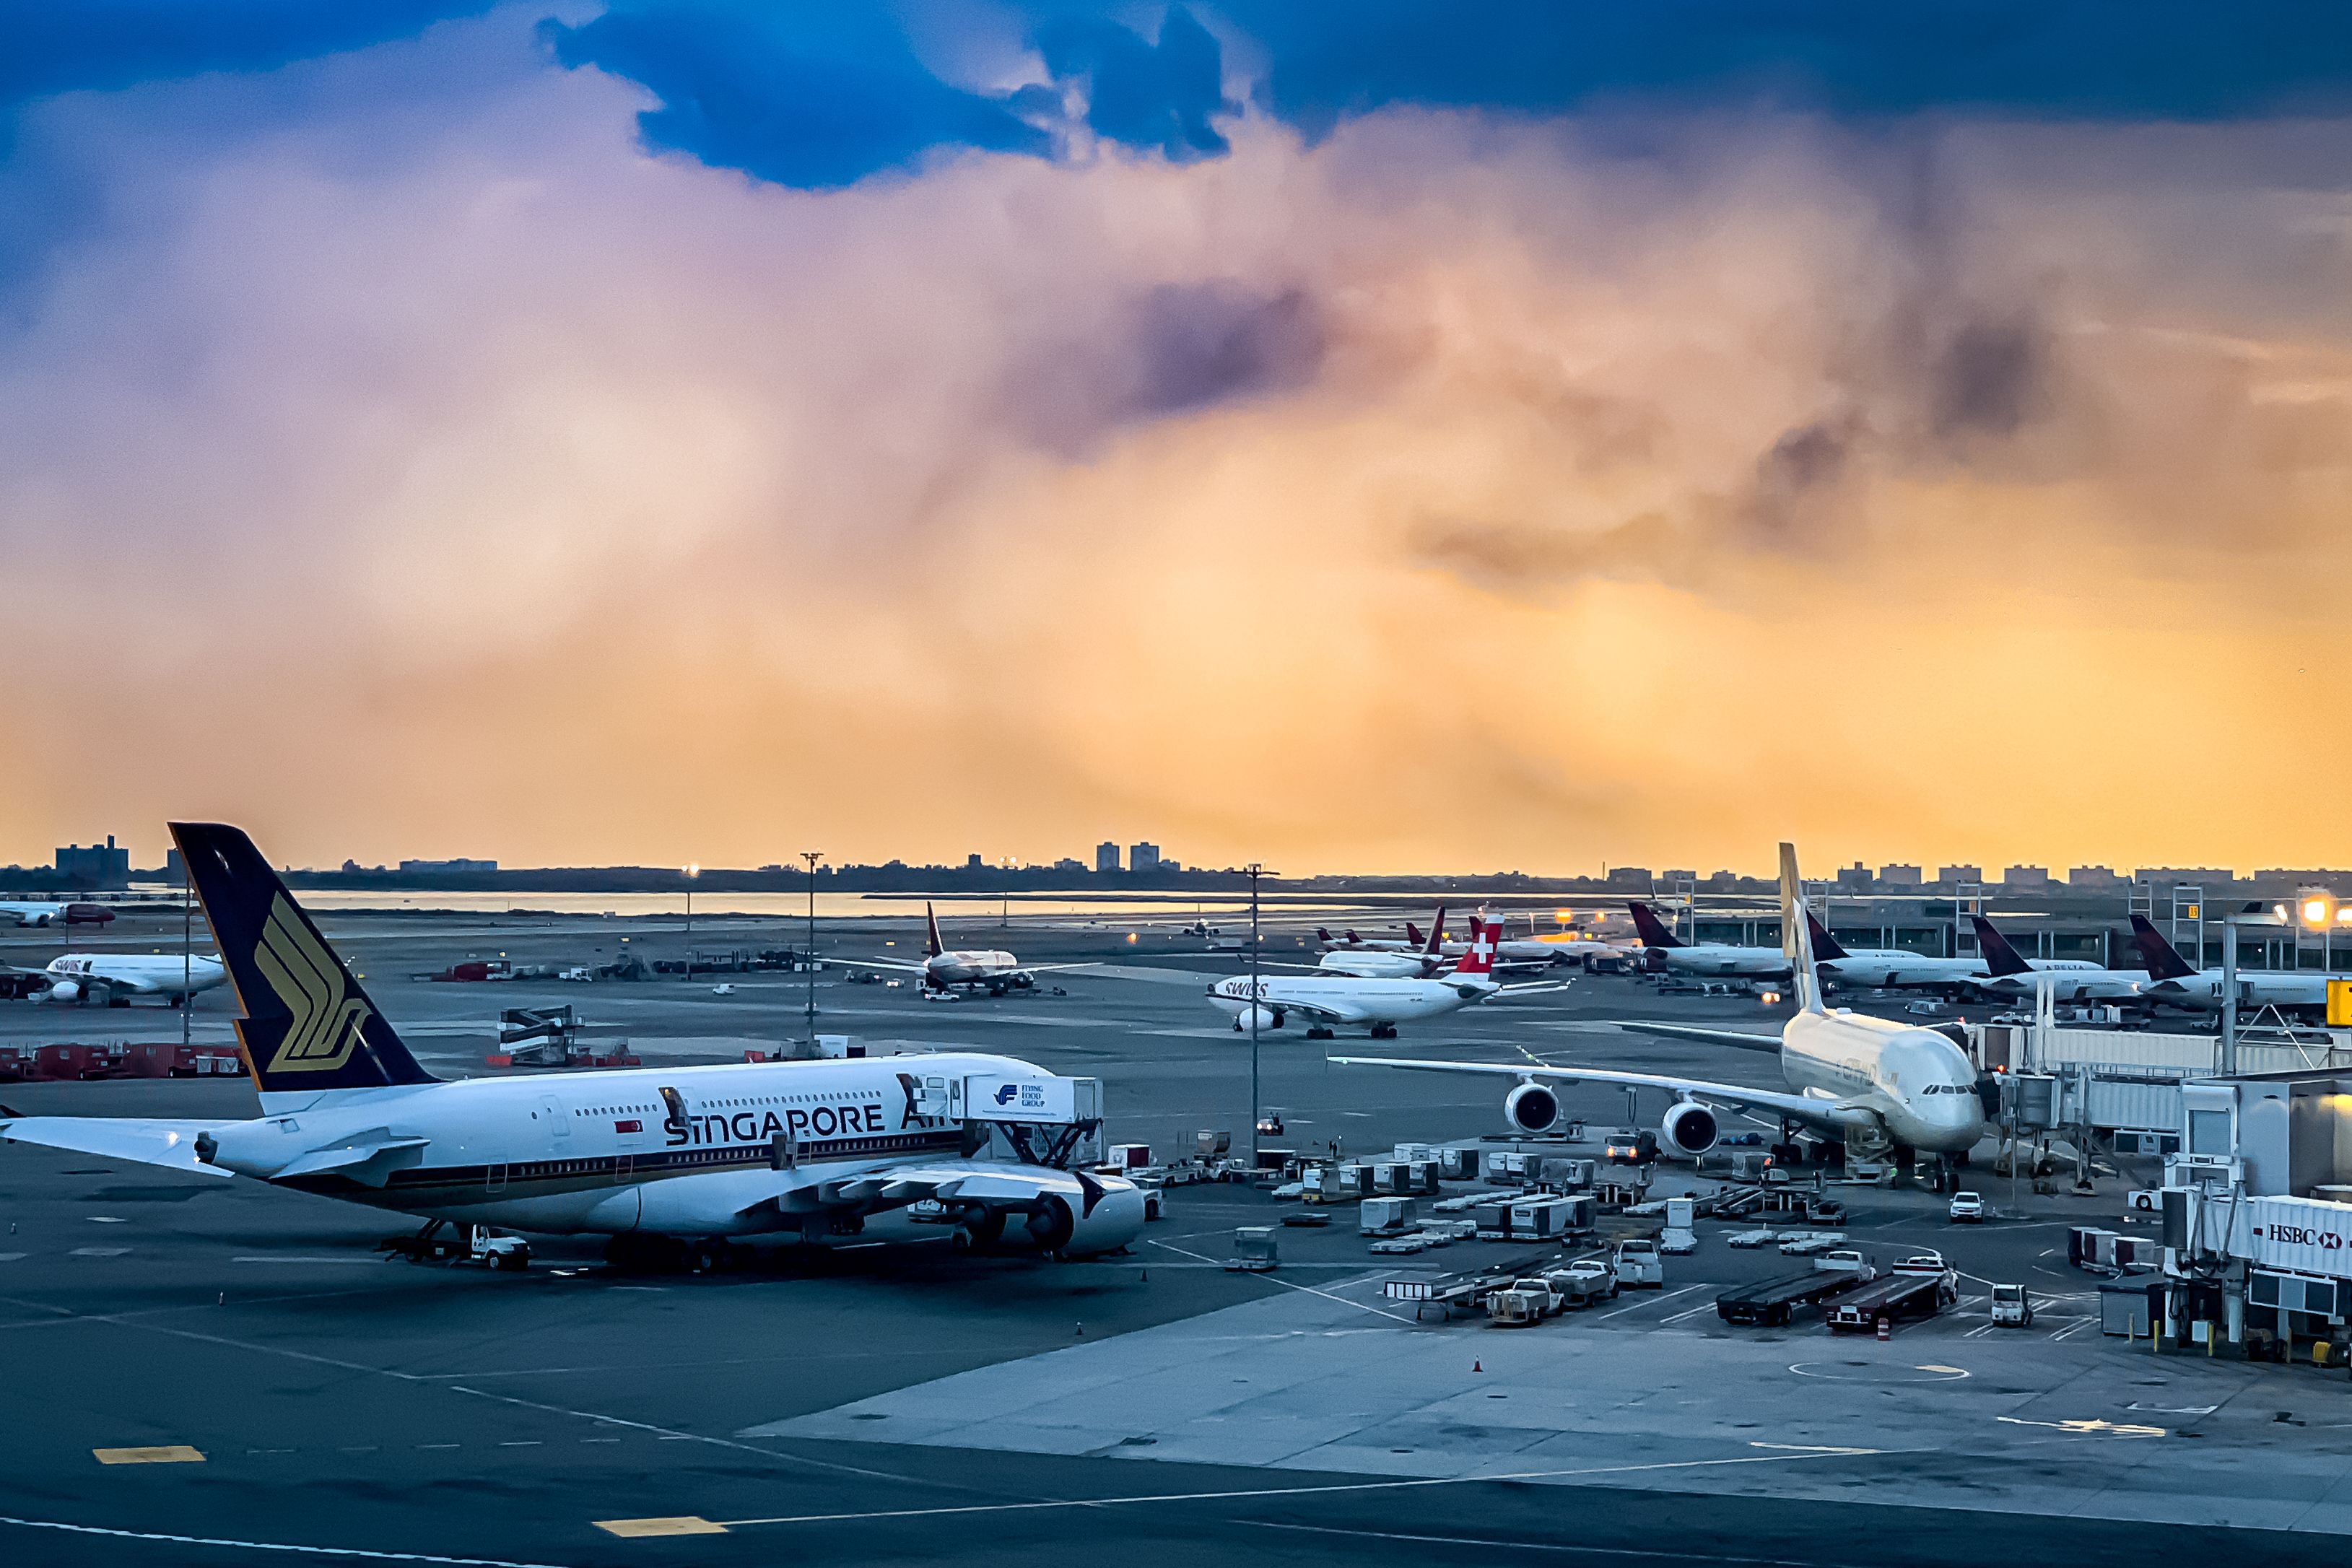 shutterstock_1527694265 - John F. Kennedy International Airport (JFK Airport) and the airplanes on the ground during a rainy thunderstorm clouds over the sunset. Queens, New York, USA, October 2, 2019.